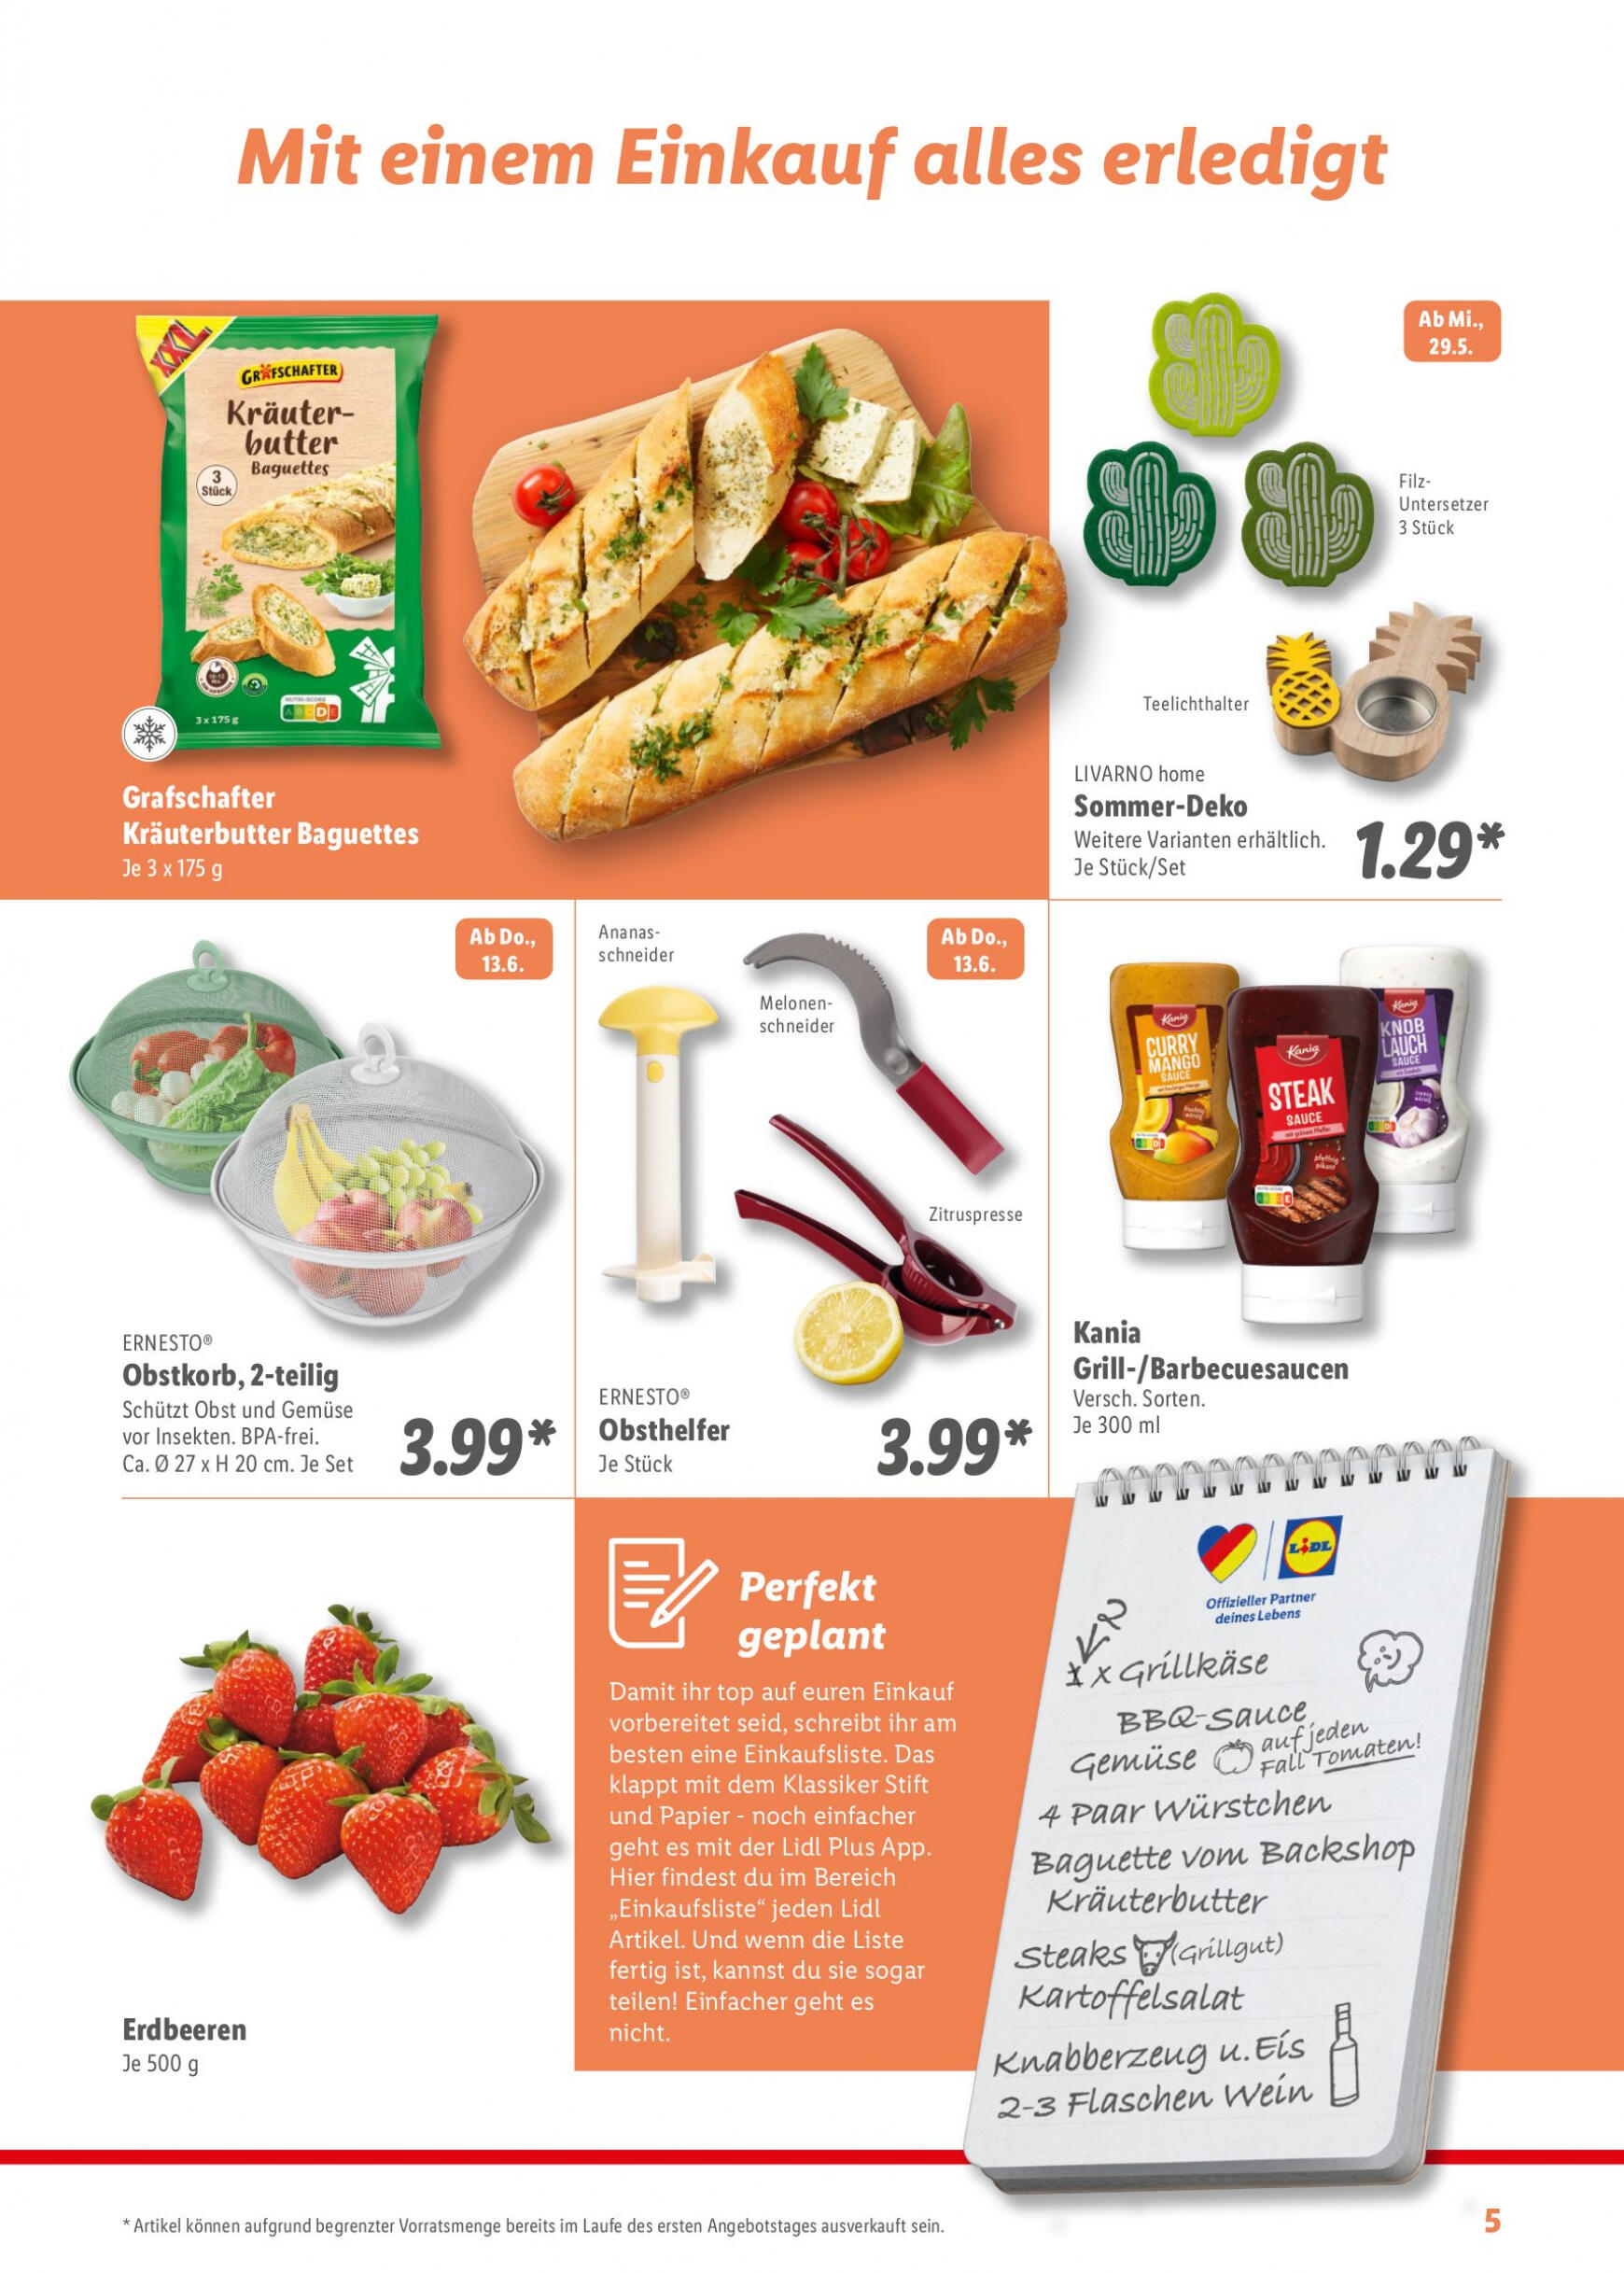 lidl - Flyer Lidl - aktuell 13.05. - 16.06. - page: 5